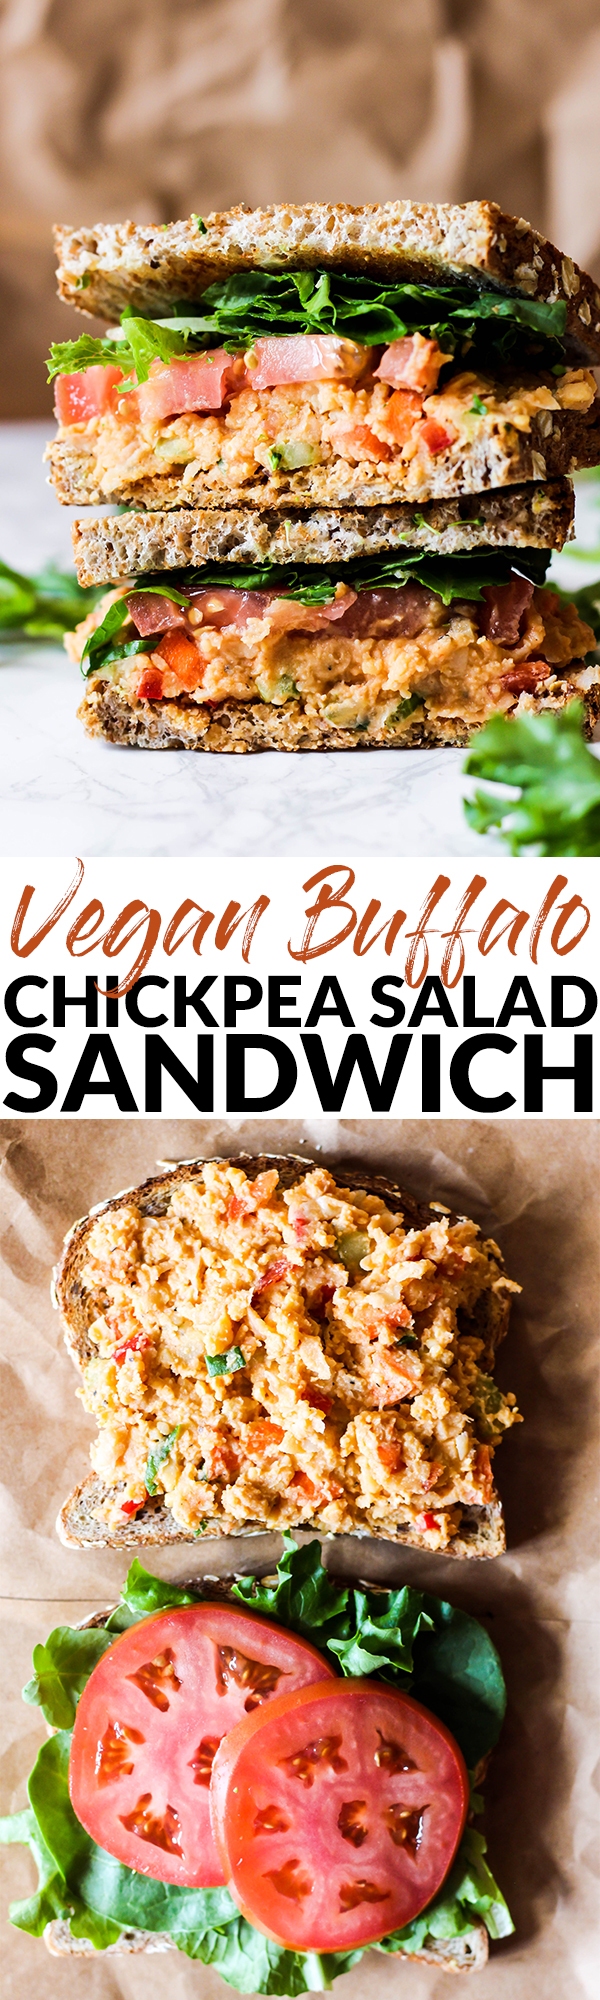 This Vegan Buffalo Chickpea Salad Sandwich is the perfect lunch to pack for adults or kids! It's full of vegetables, beans and grains to keep you satisfied.